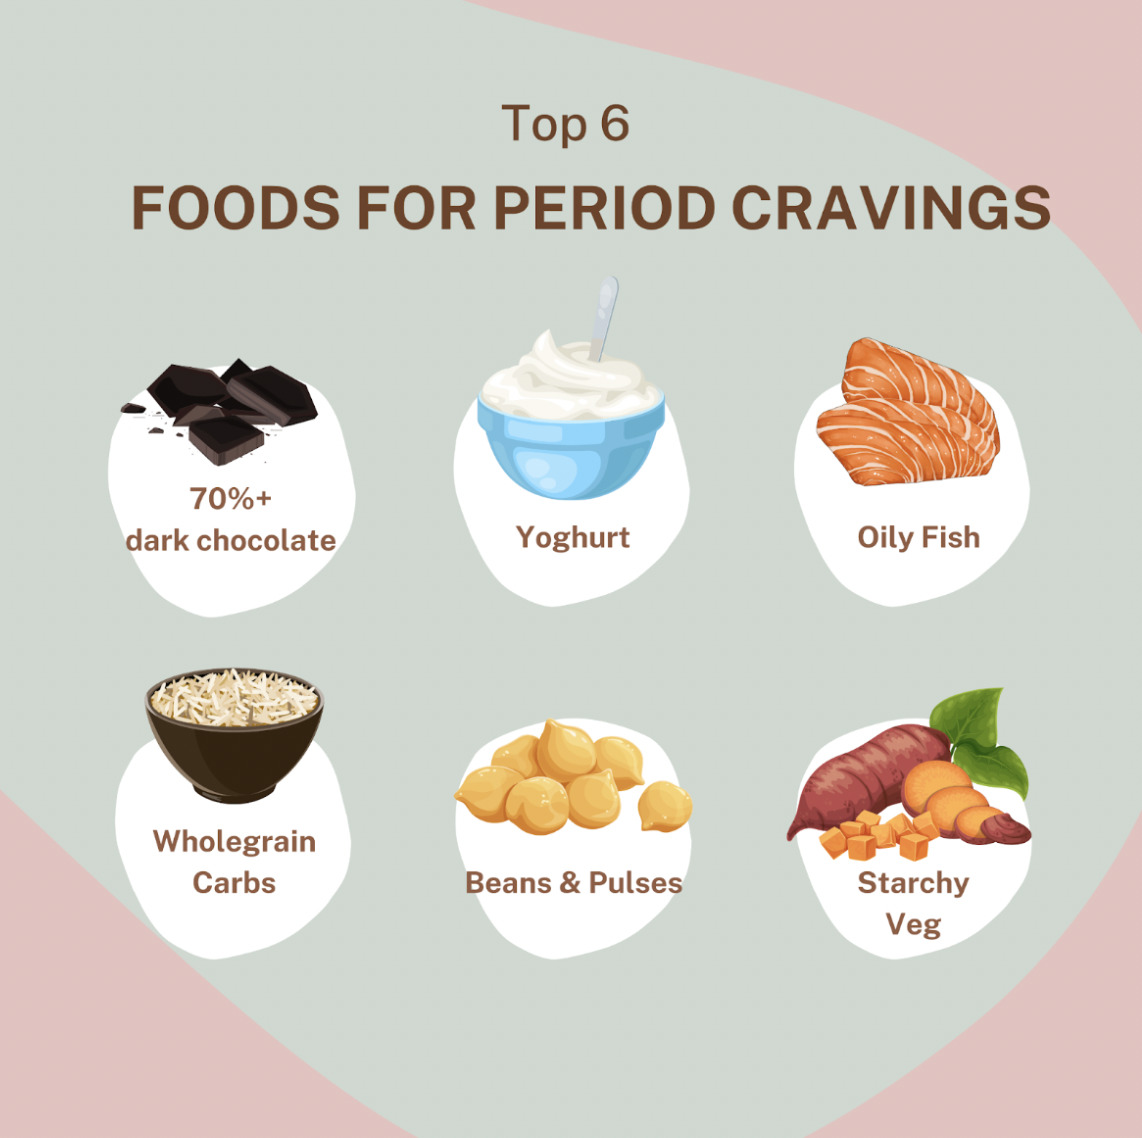 What foods are good for period cravings?